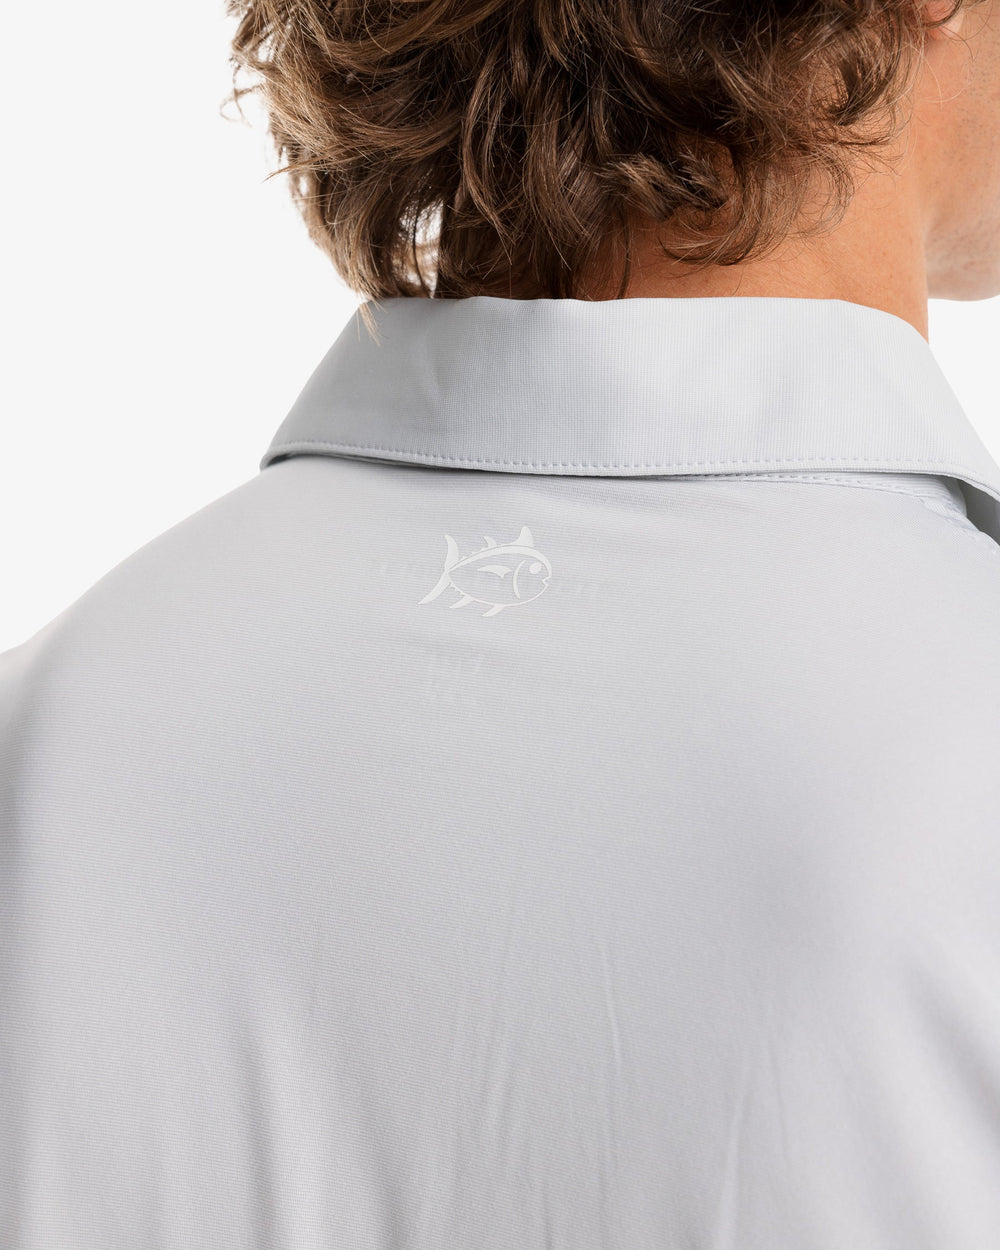 The model yoke view of the Men's Sawgrass Stripe brrr°®-eeze Performance Polo Shirt by Southern Tide - Seagull Grey